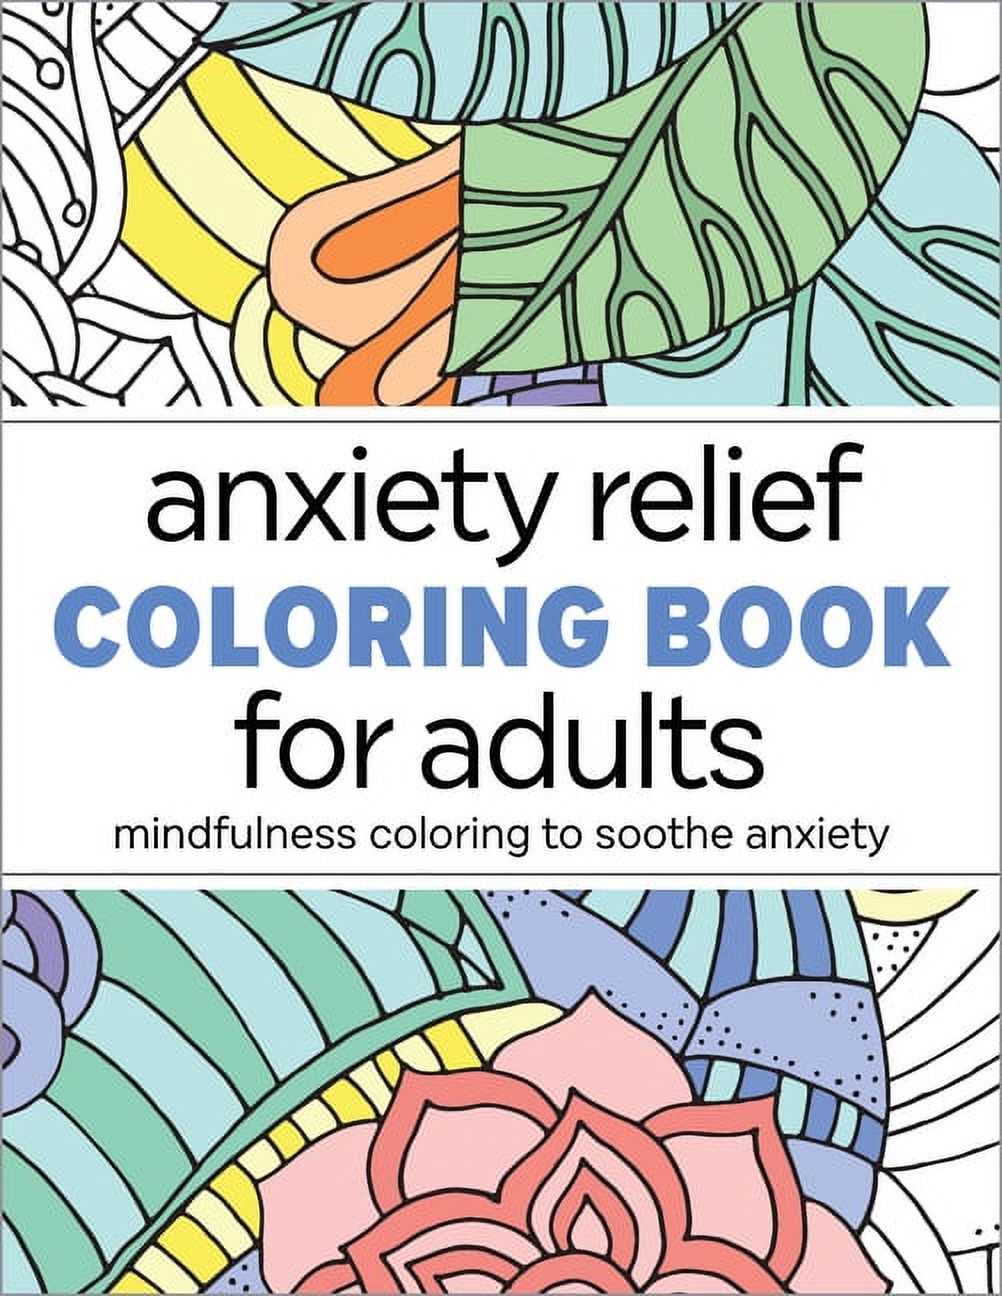 Anxiety Relief Coloring Book for Adults: Mindfulness Coloring to Soothe Anxiety - image 1 of 1